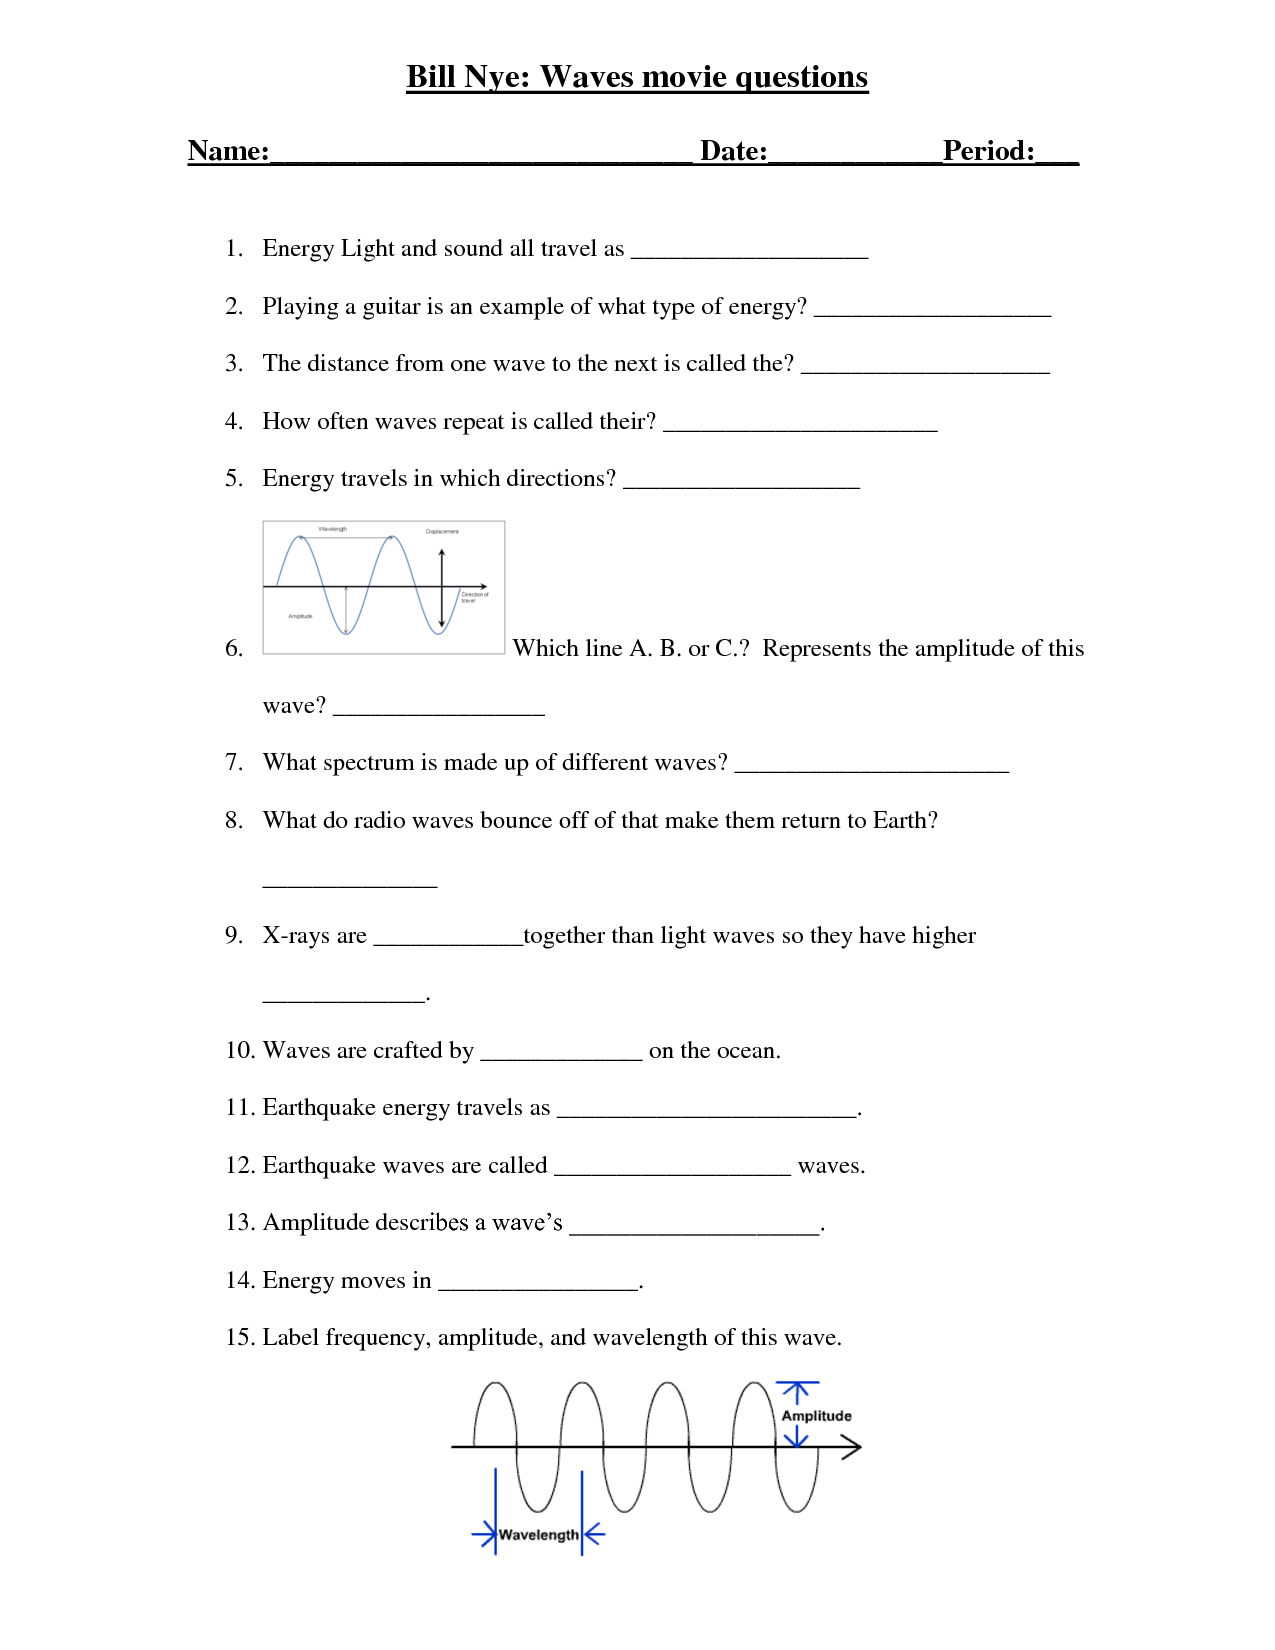 earthquakes-and-volcanoes-worksheet-answer-key-coearth